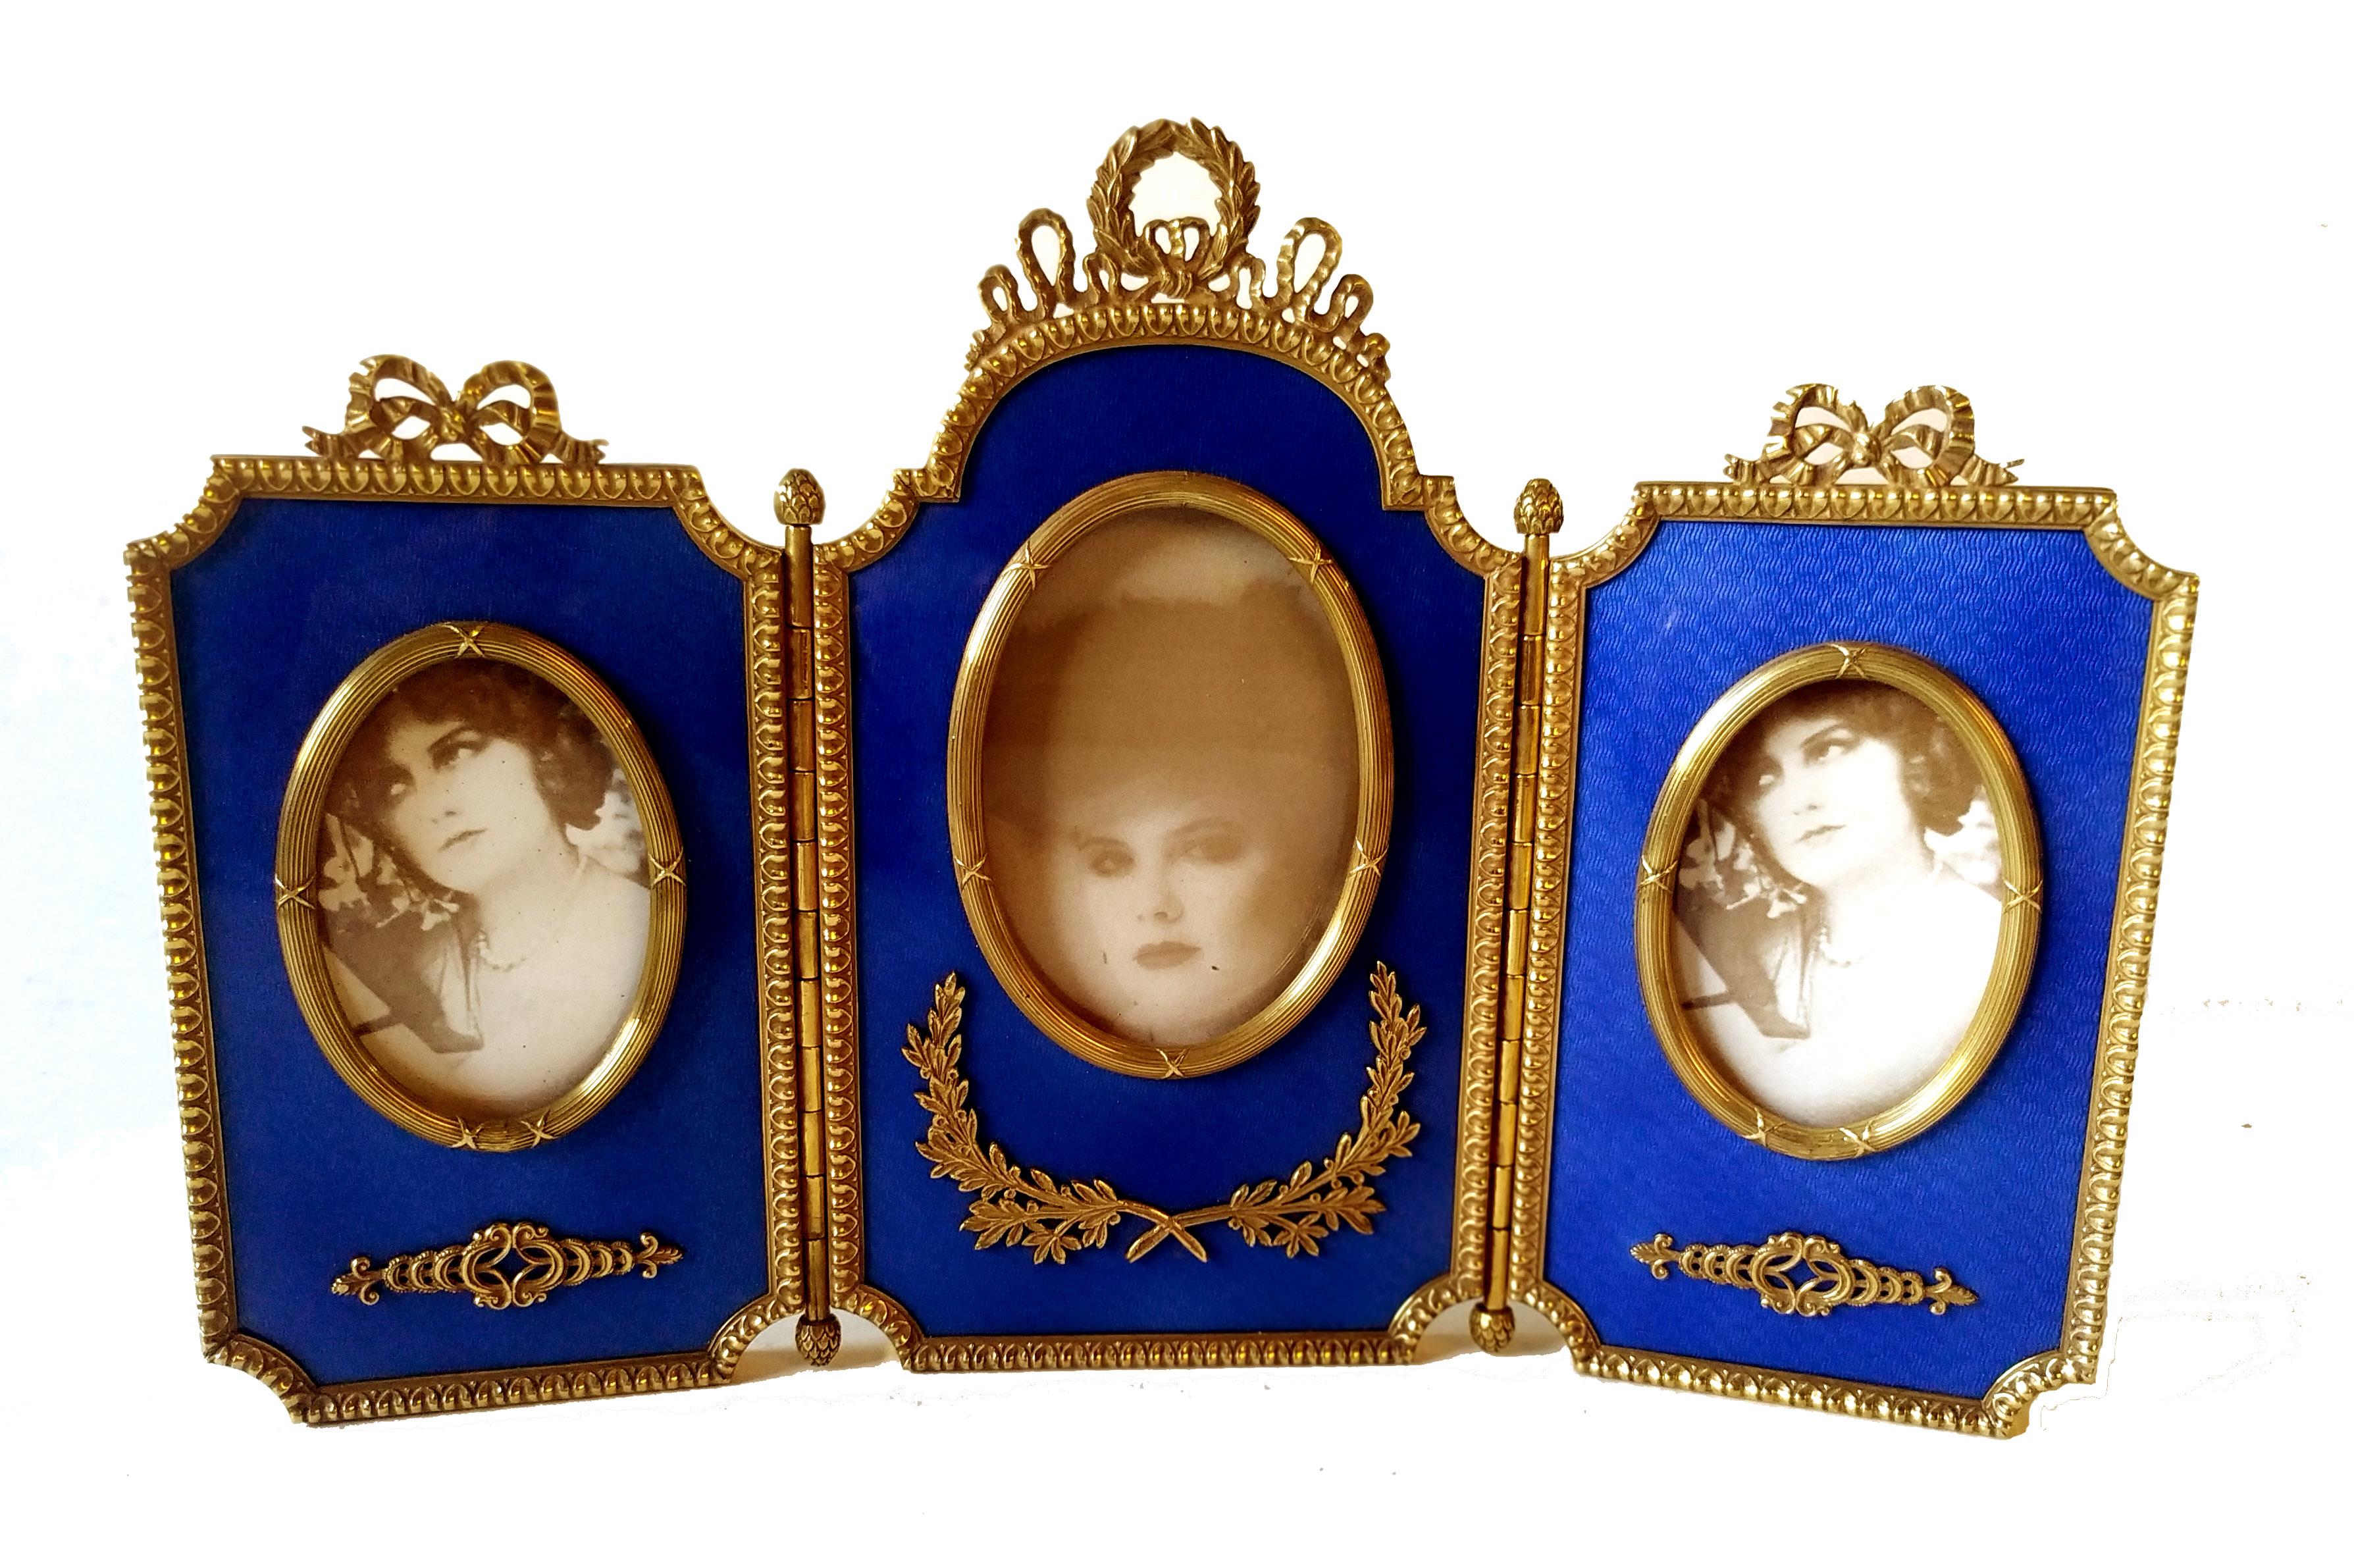 Triptych hinged shaped frame for 3 photographs in 925/1000 sterling silver gold plated  with translucent fired enamel on guillochè with borders and ornaments in French Louis XVI Empire style. Open measurements 27.7 x 18.2 cm. Weight gr. 877.